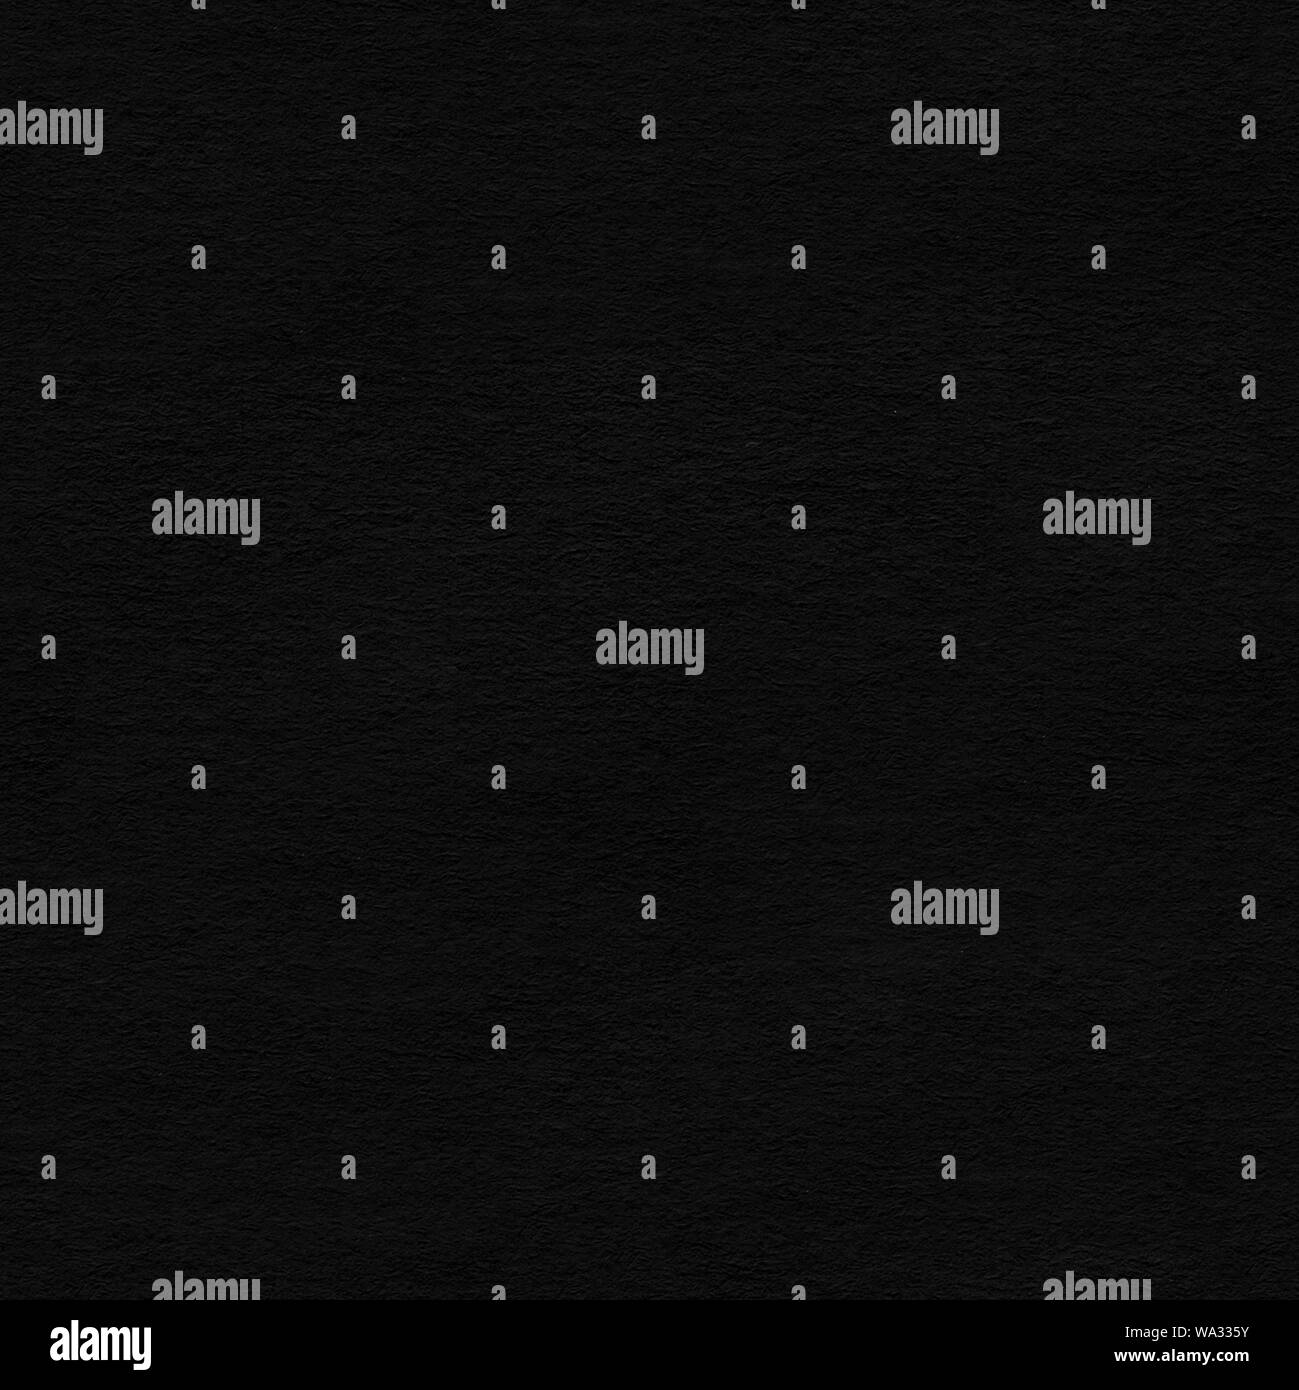 https://c8.alamy.com/comp/WA335Y/black-paper-texture-hi-res-photo-seamless-square-background-tile-ready-high-quality-texture-in-extremely-high-resolution-WA335Y.jpg